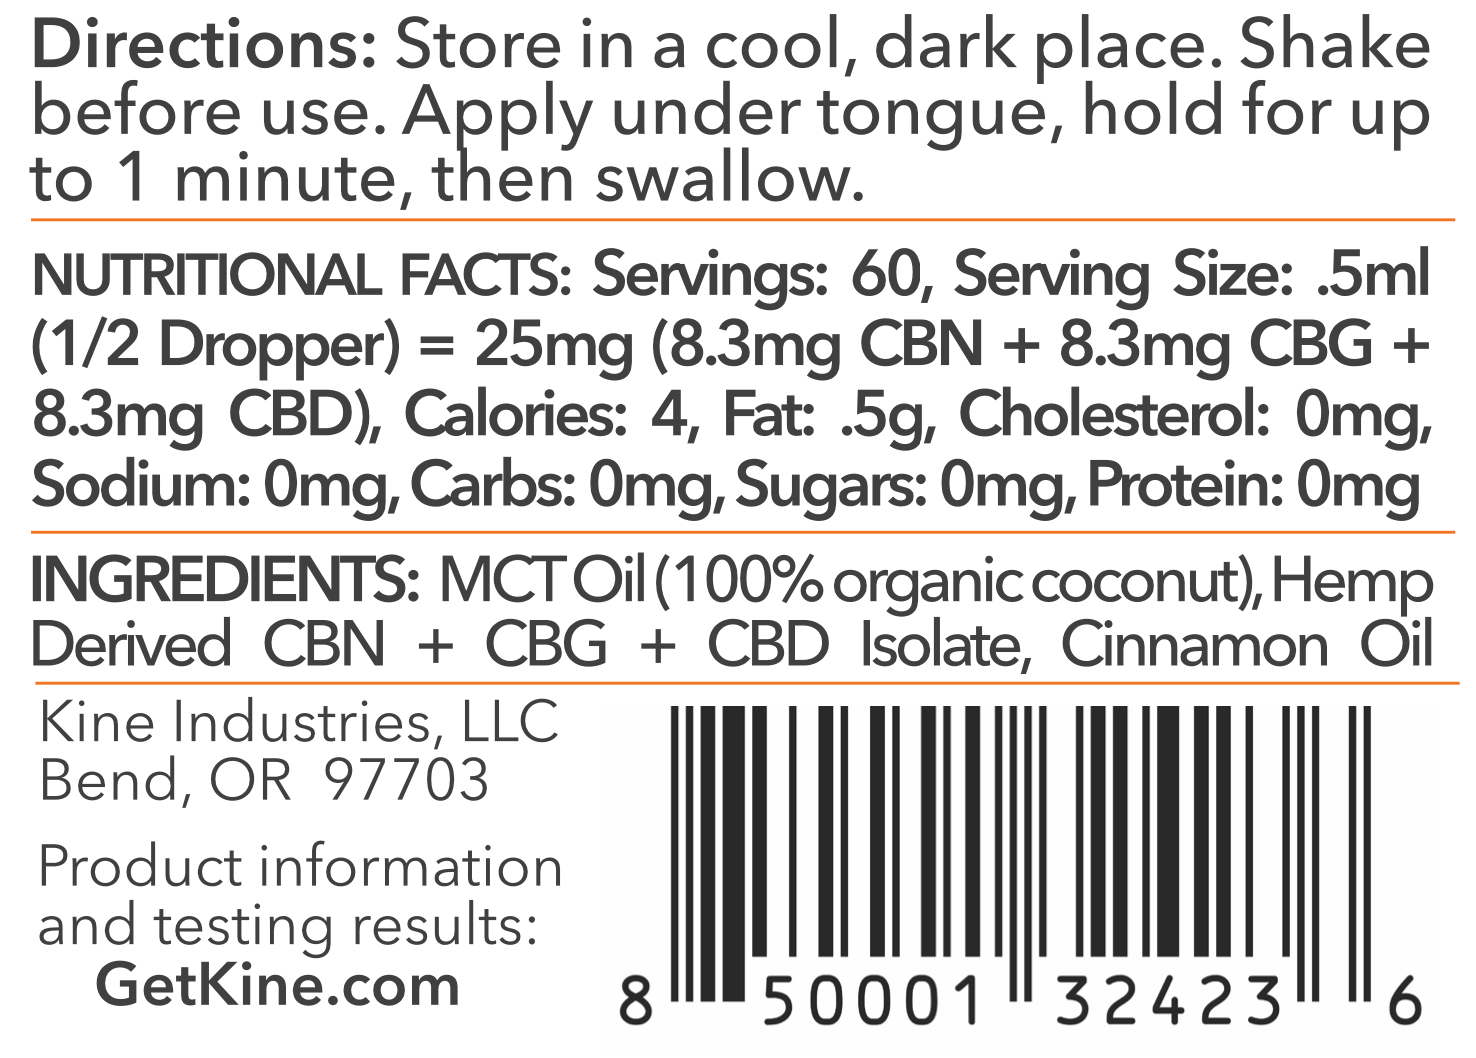 Kine Red Hot Cinnamon Flavored Organic CBN/CBG/CBD 1:1:1 ratio 1500mg tincture drops ingredients list and nutritional facts